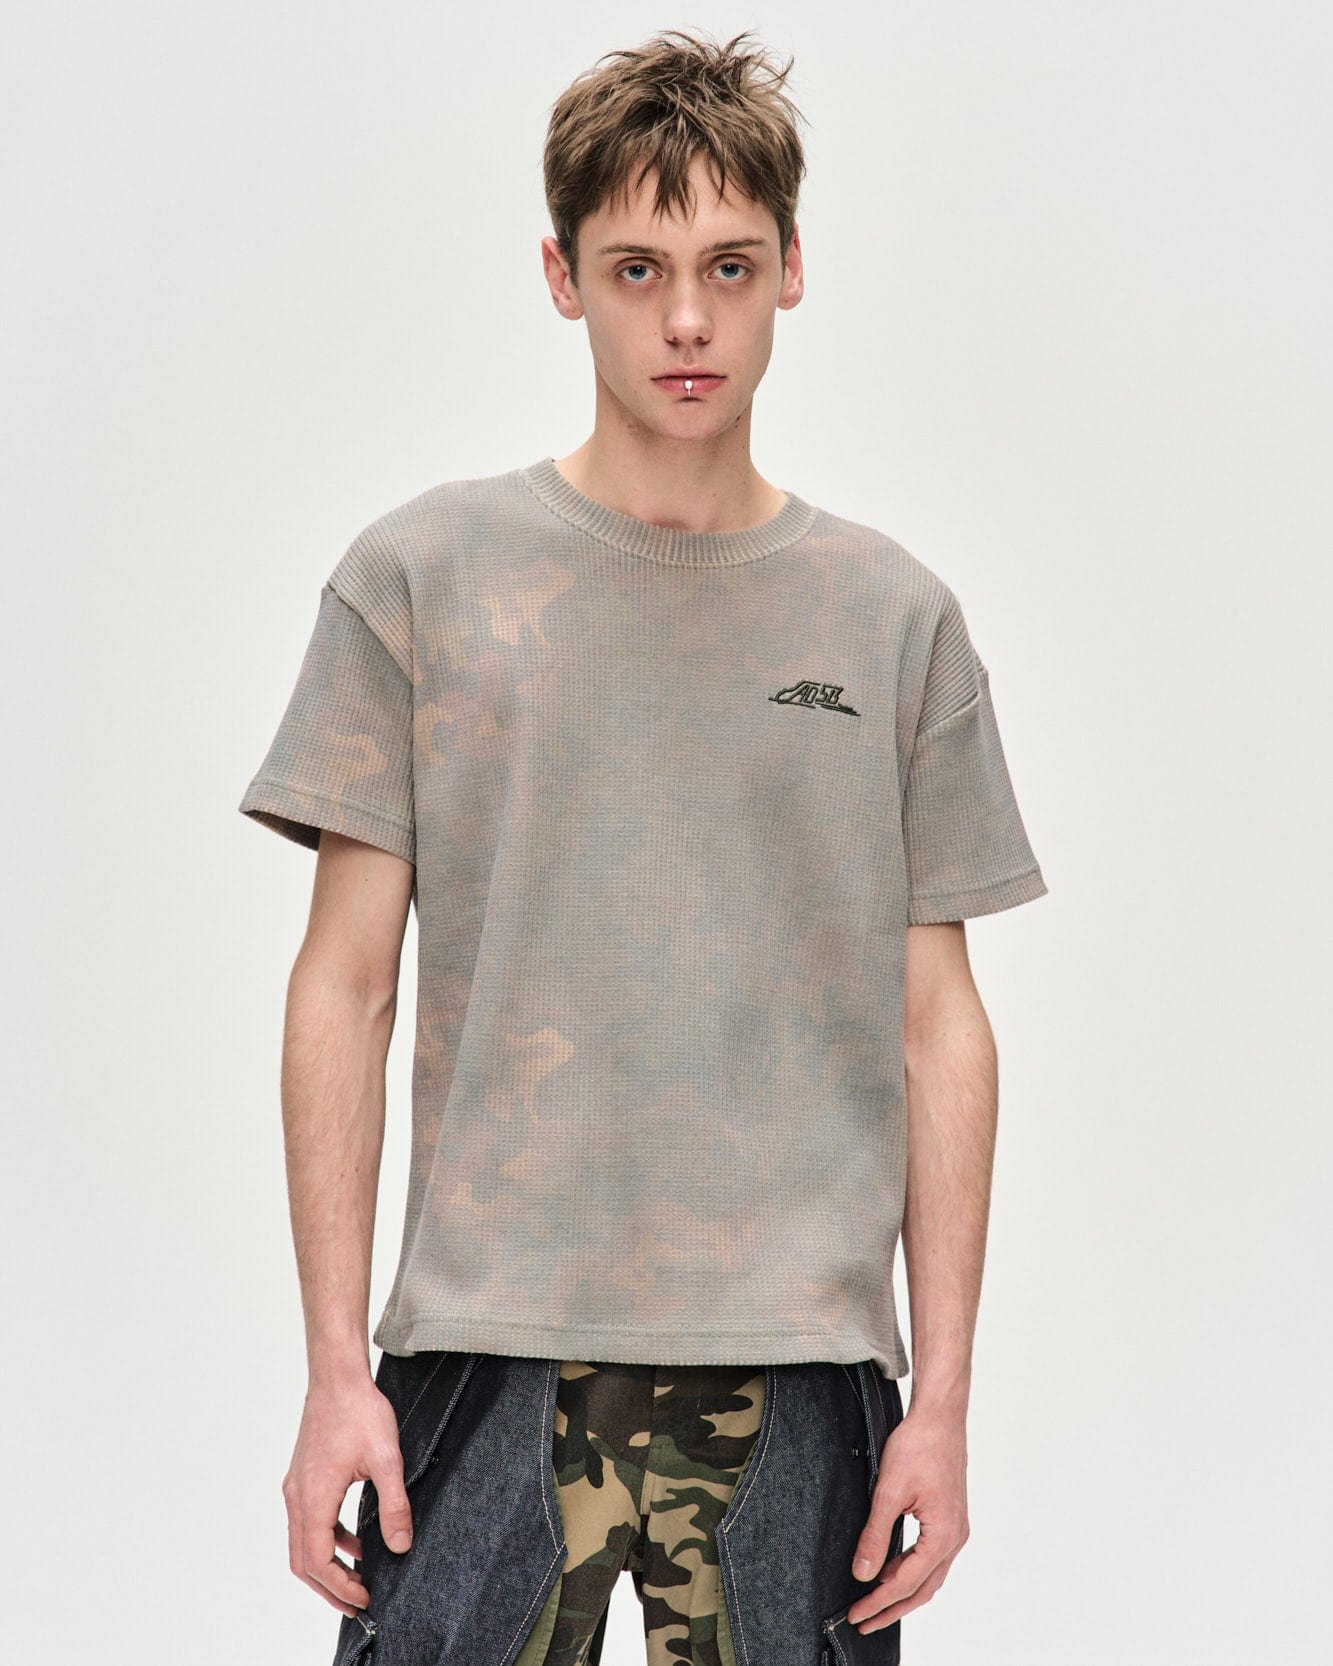 Andersson Bell UNISEX CAMOUFLAGE WAFFLE T-SHIRTS atb1087u(SAND)